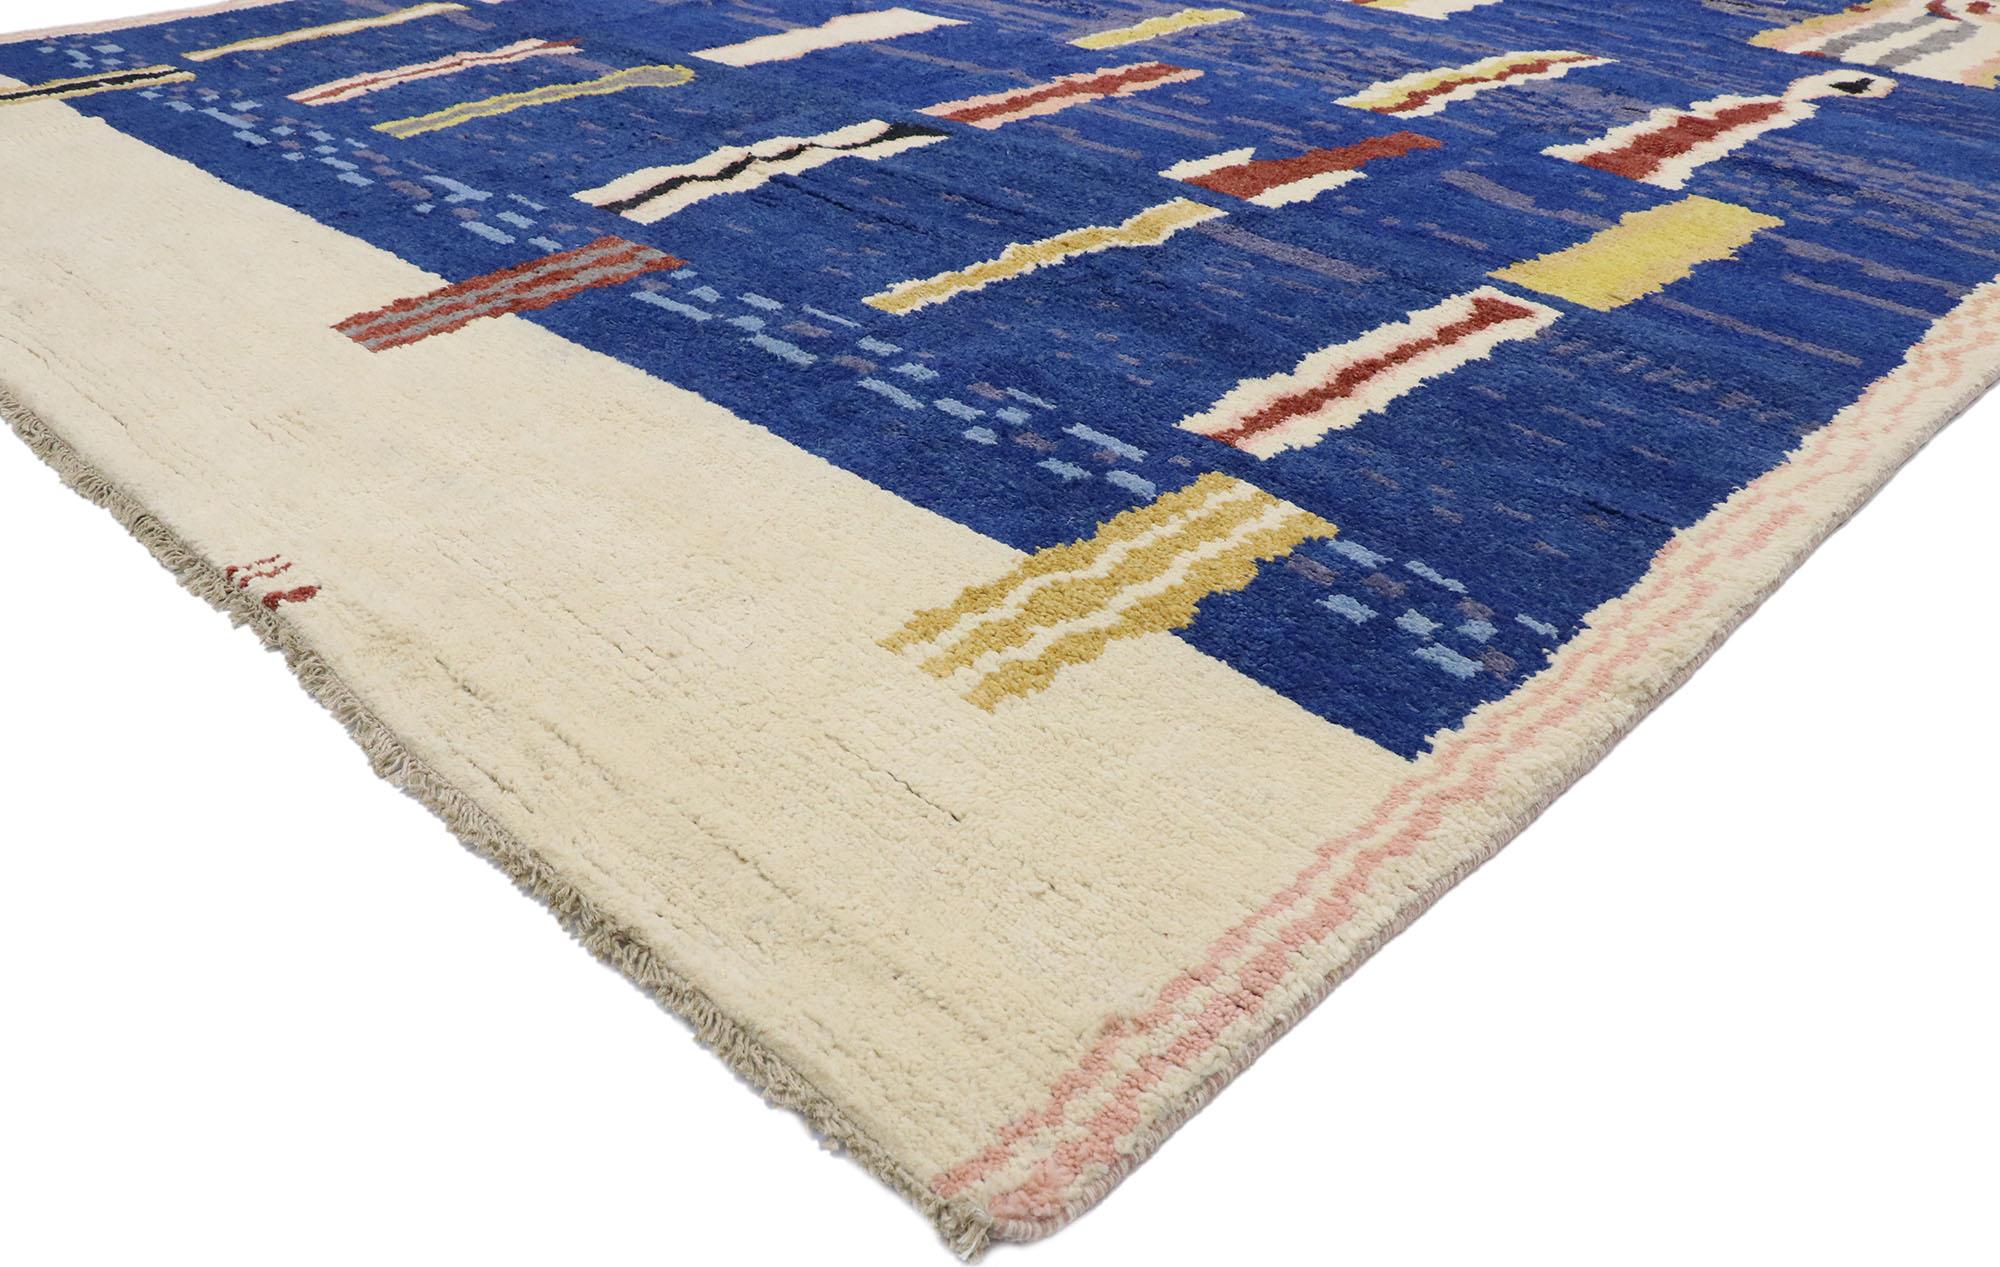 80643 New contemporary Moroccan rug. Showcasing a bold expressive design, incredible detail and texture, this hand knotted wool contemporary Moroccan style rug is a captivating vision of woven beauty. Luminous blue hues and rich waves of abrash